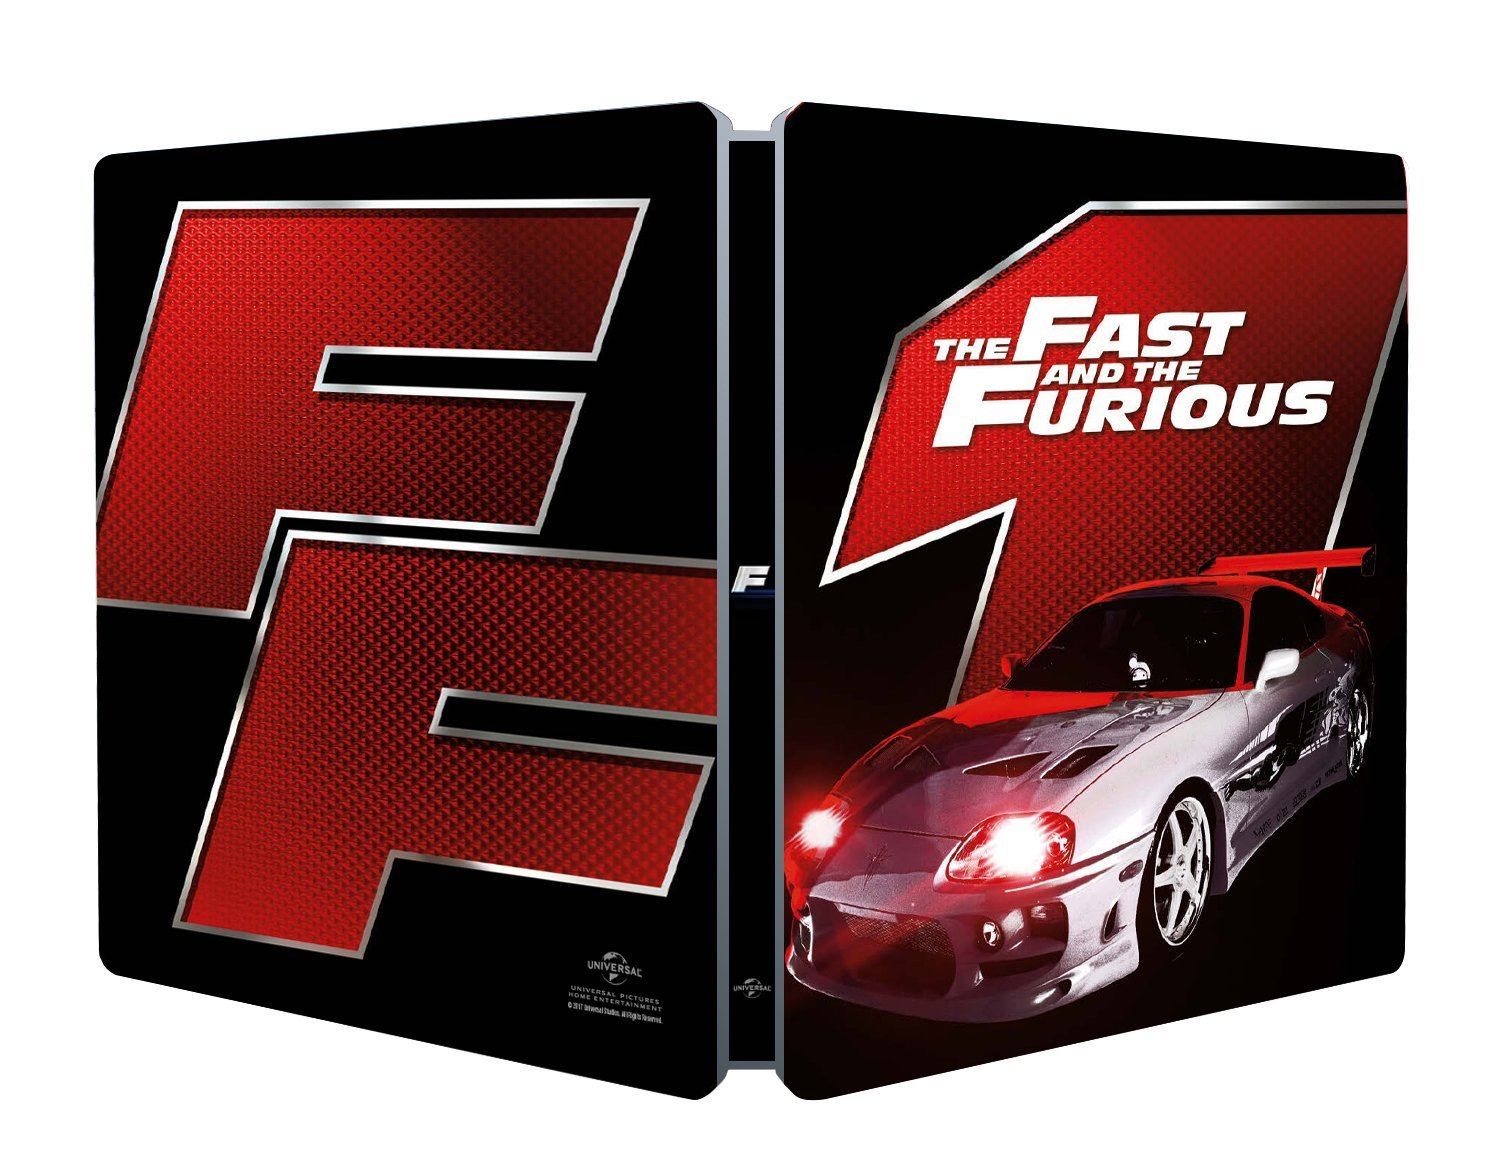 Fast and Furious steelbook it